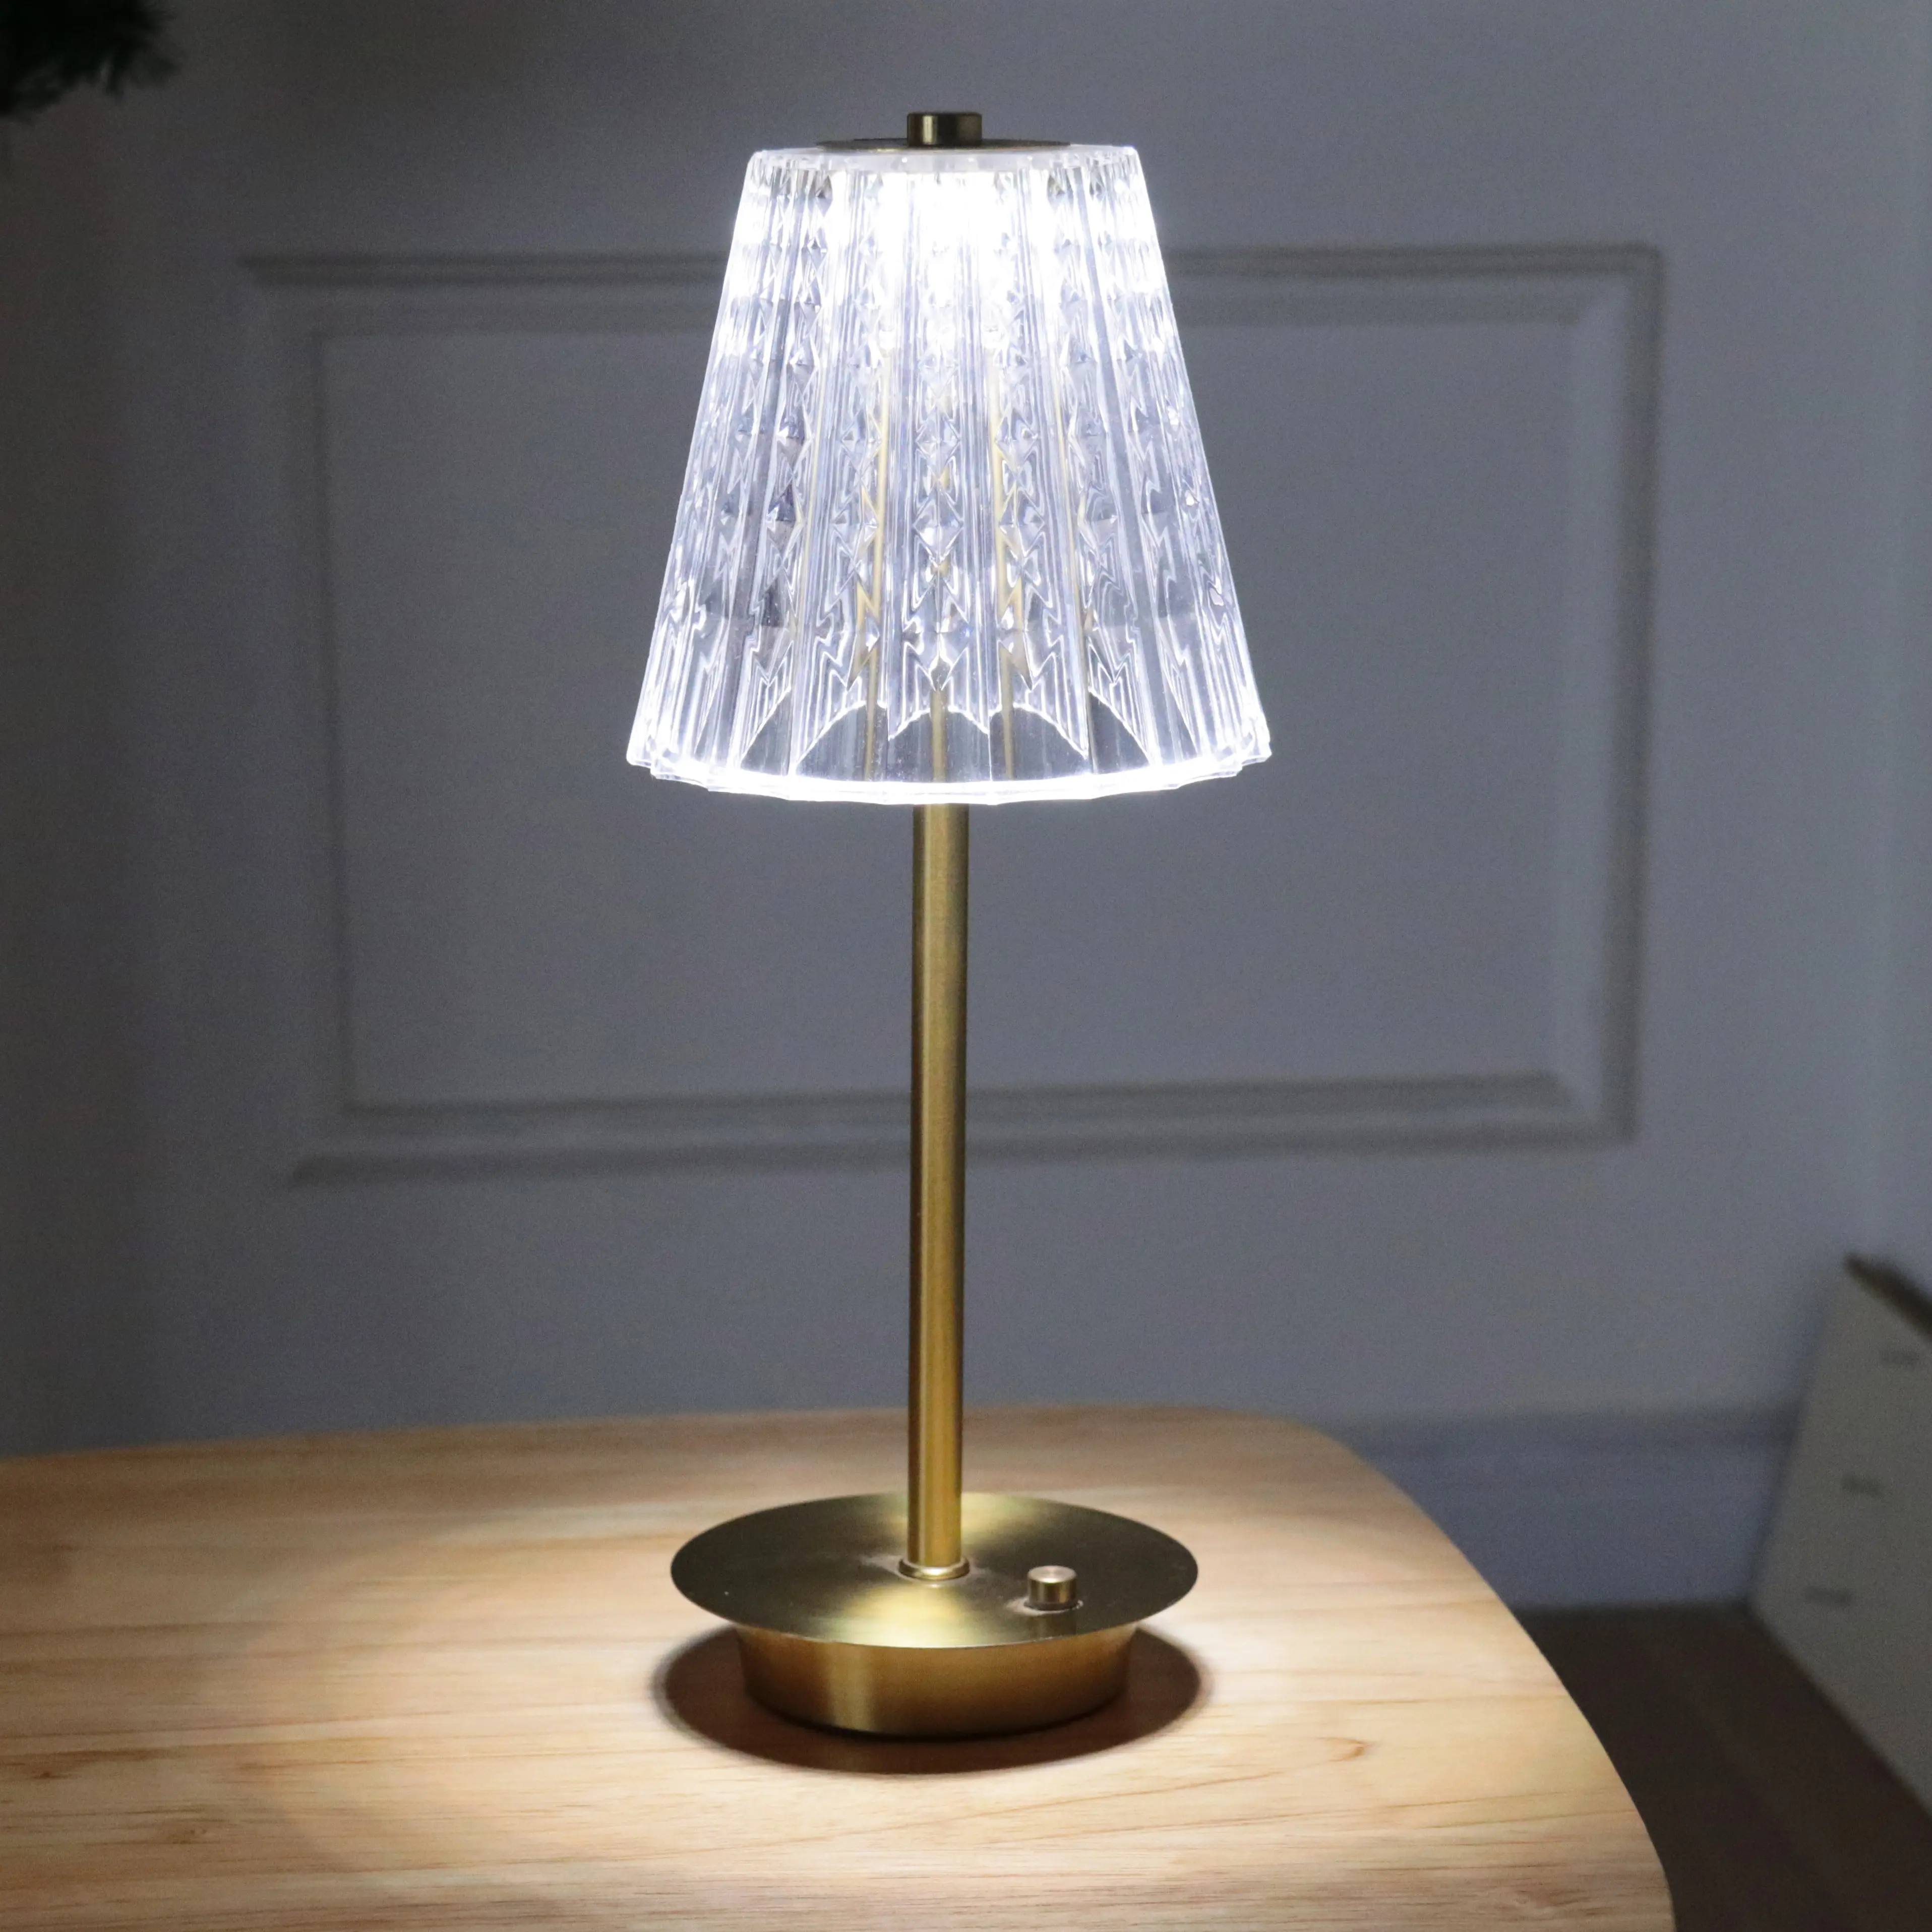 Touch lamps for elderly